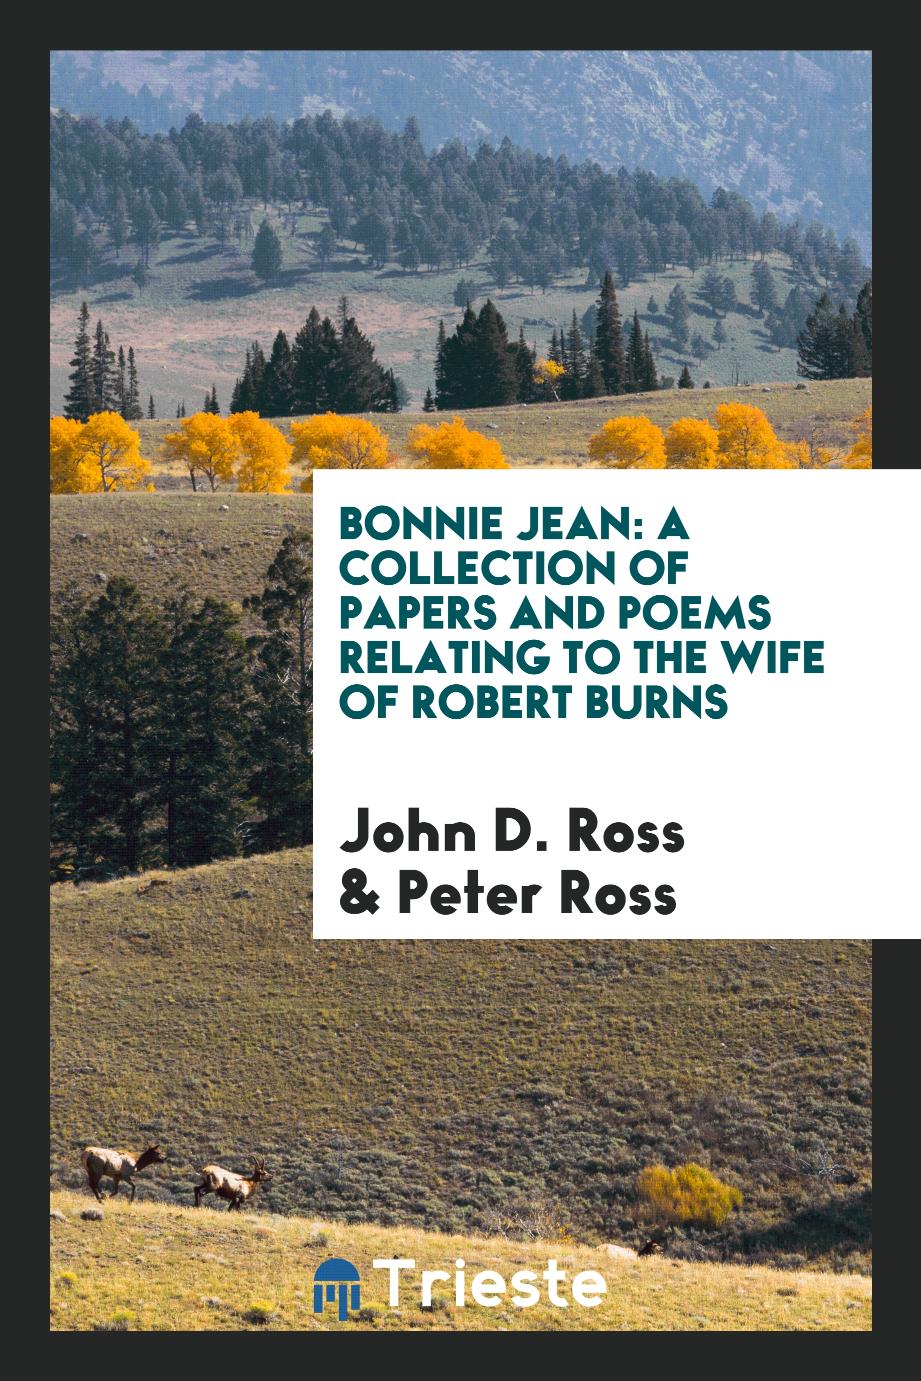 Bonnie Jean: a collection of papers and poems relating to the wife of Robert Burns